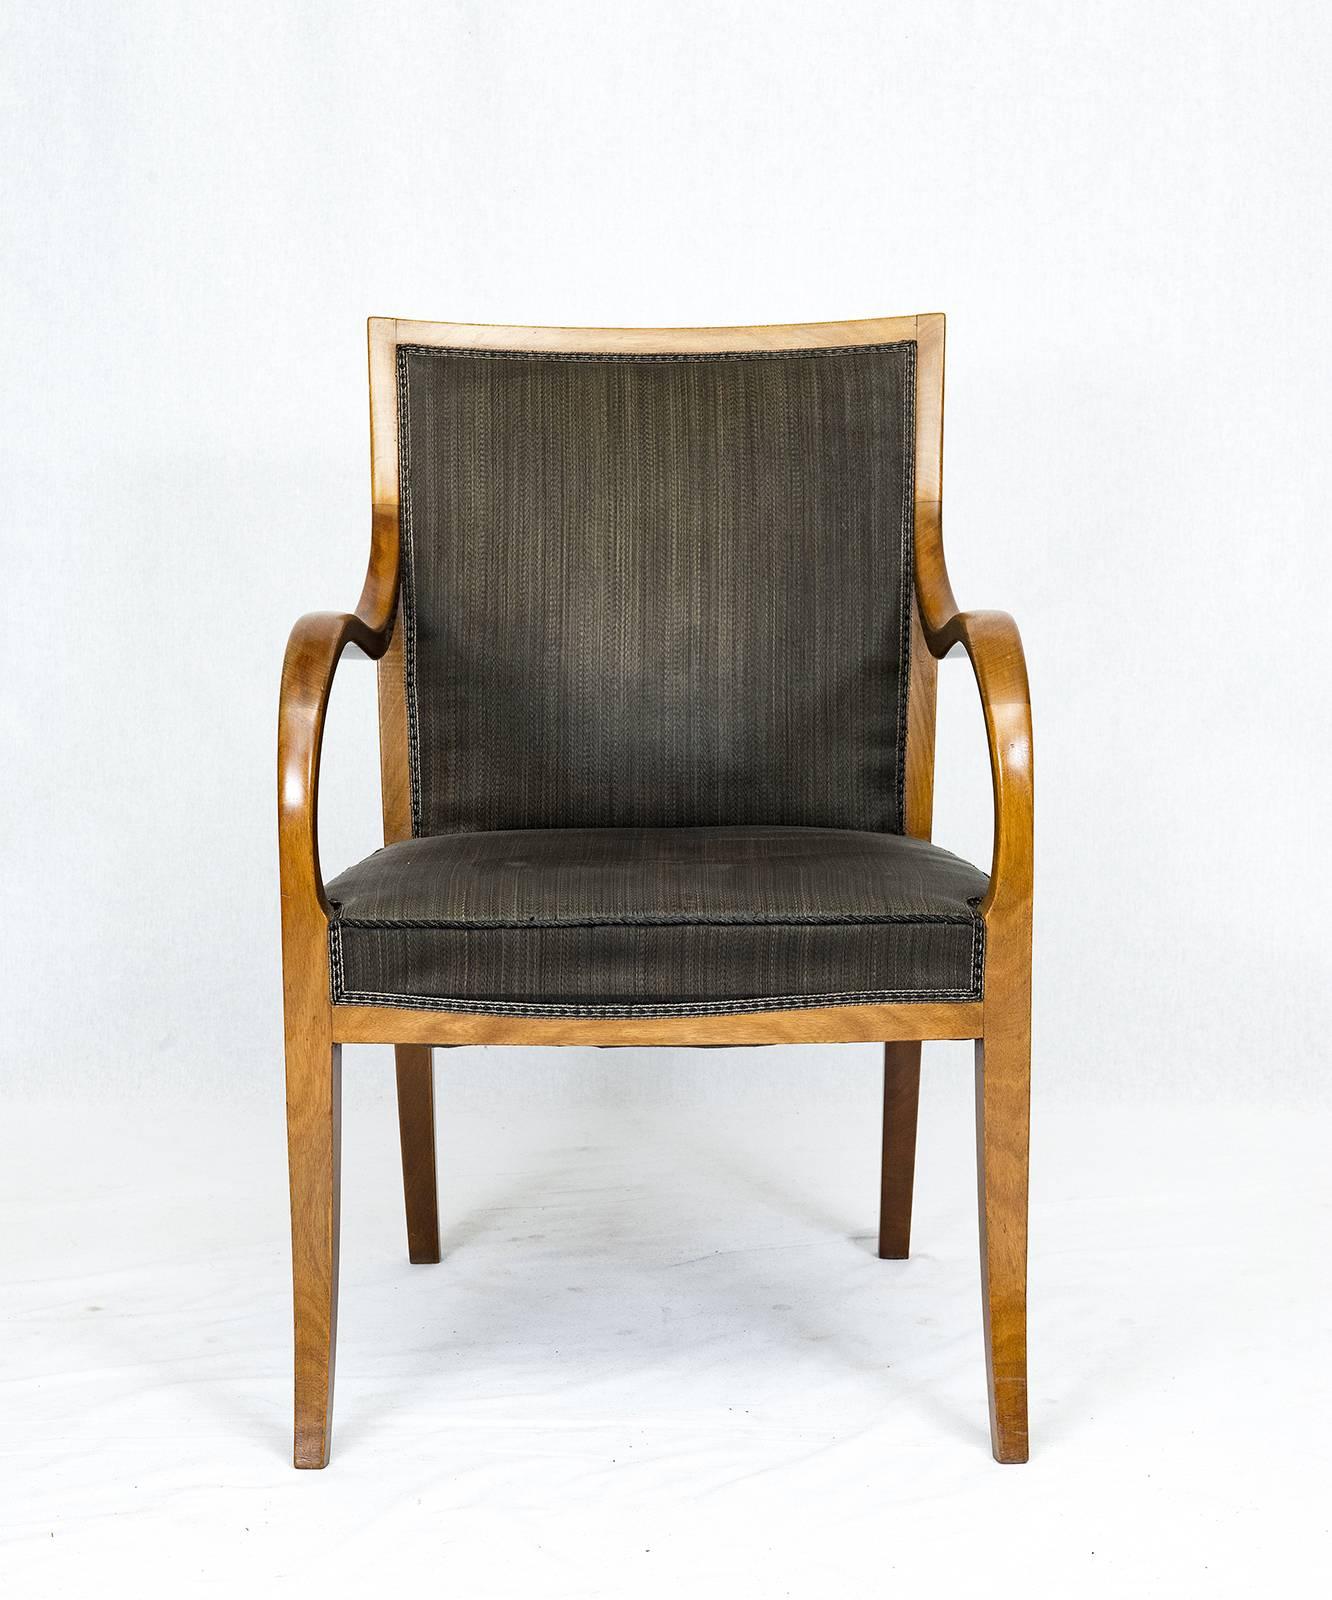 Frits Henningsen armchair with original horsehair upholstery.   Store formerly known as ARTFUL DODGER INC